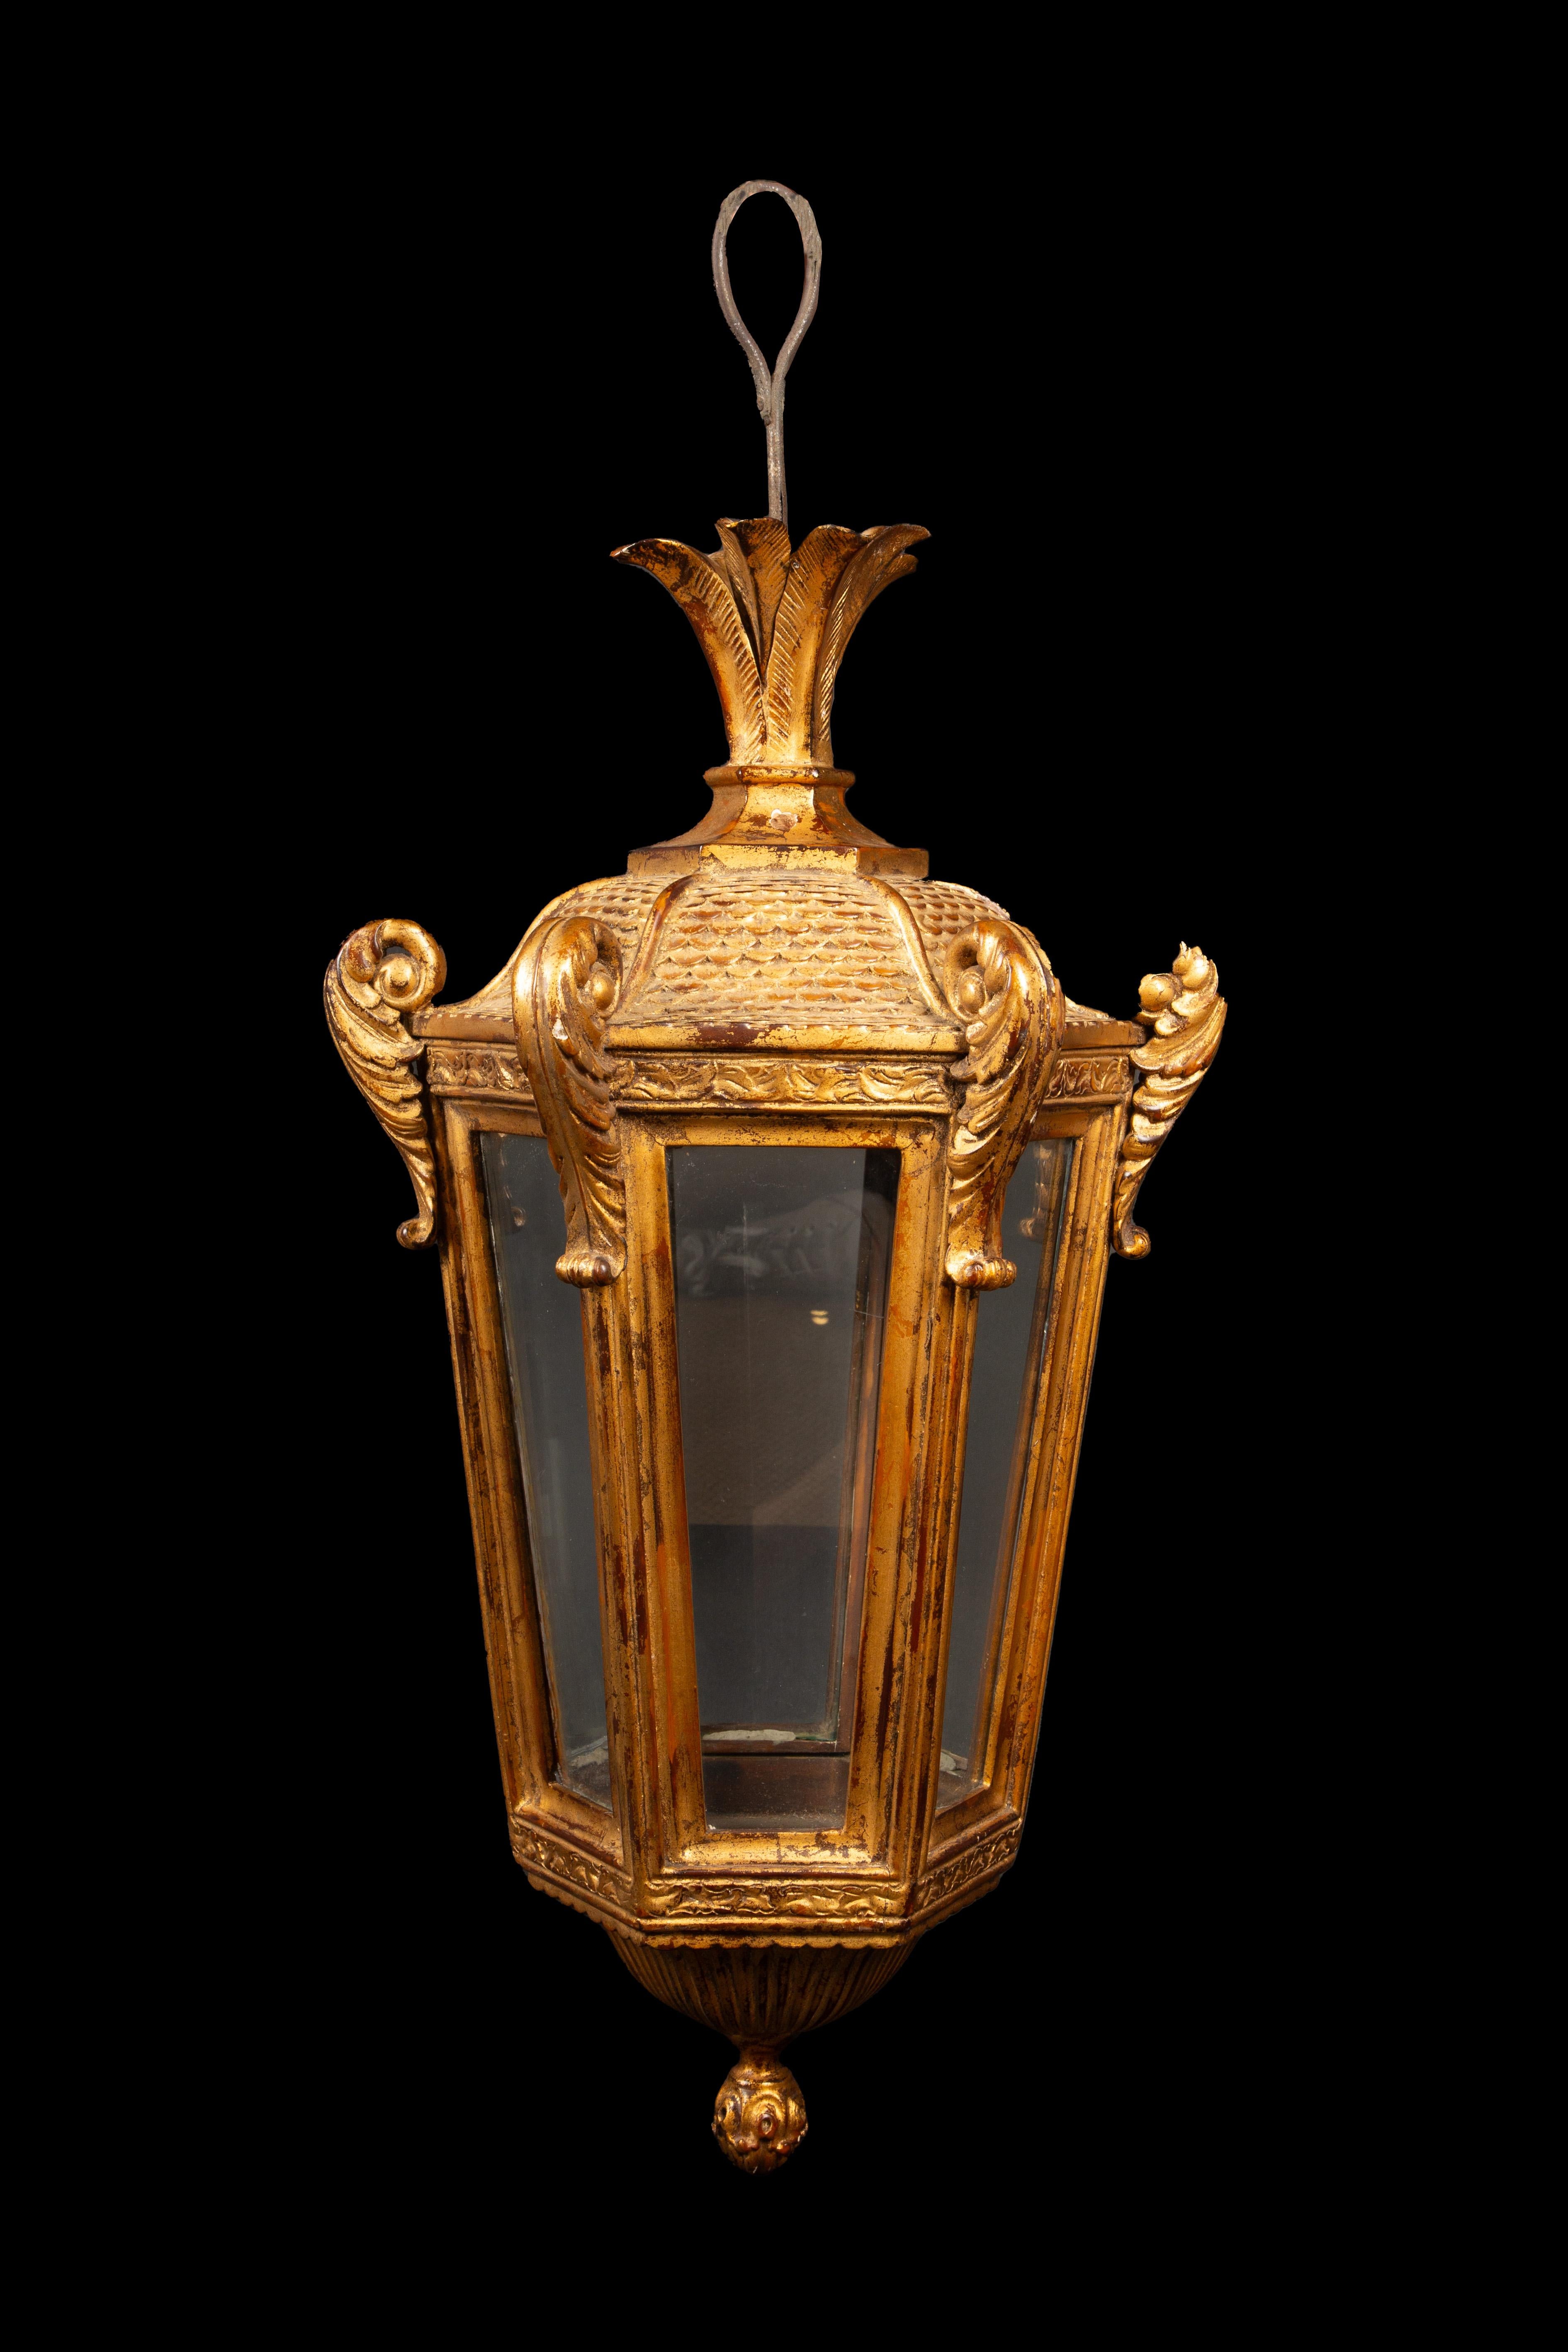 Exquisite 19th Century Carved and Gilt Wood Venetian Lantern. Crafted with meticulous artistry, this lantern's intricate carvings and lustrous gilt finish exude timeless elegance. Its glass doors offer a glimpse of the past, inviting you to